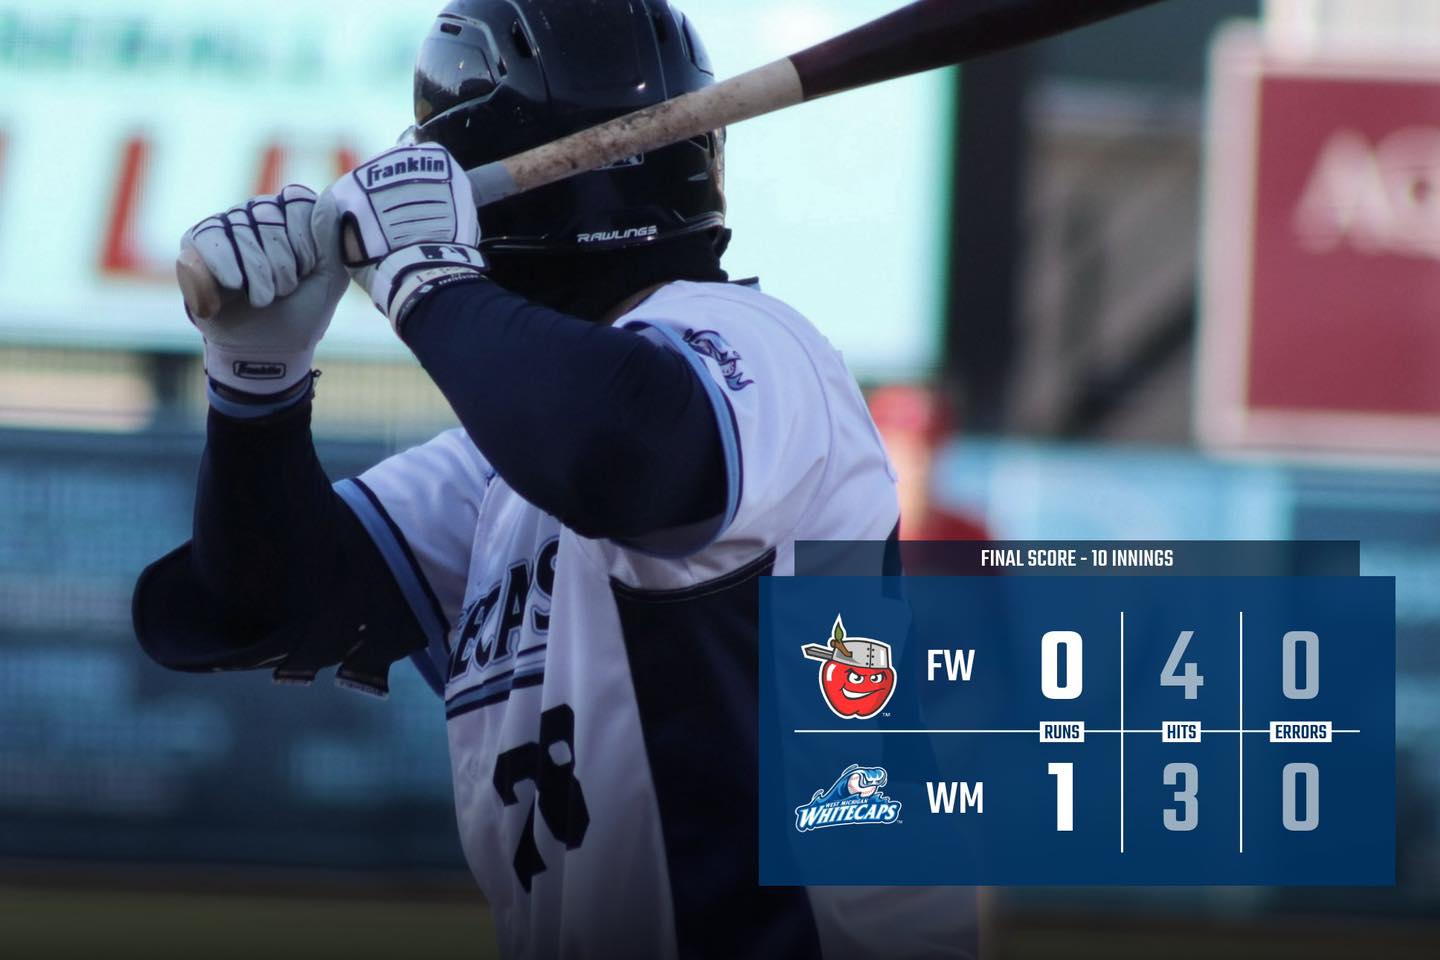 Hernandez and Whitecaps shut out Fort Wayne in home opener